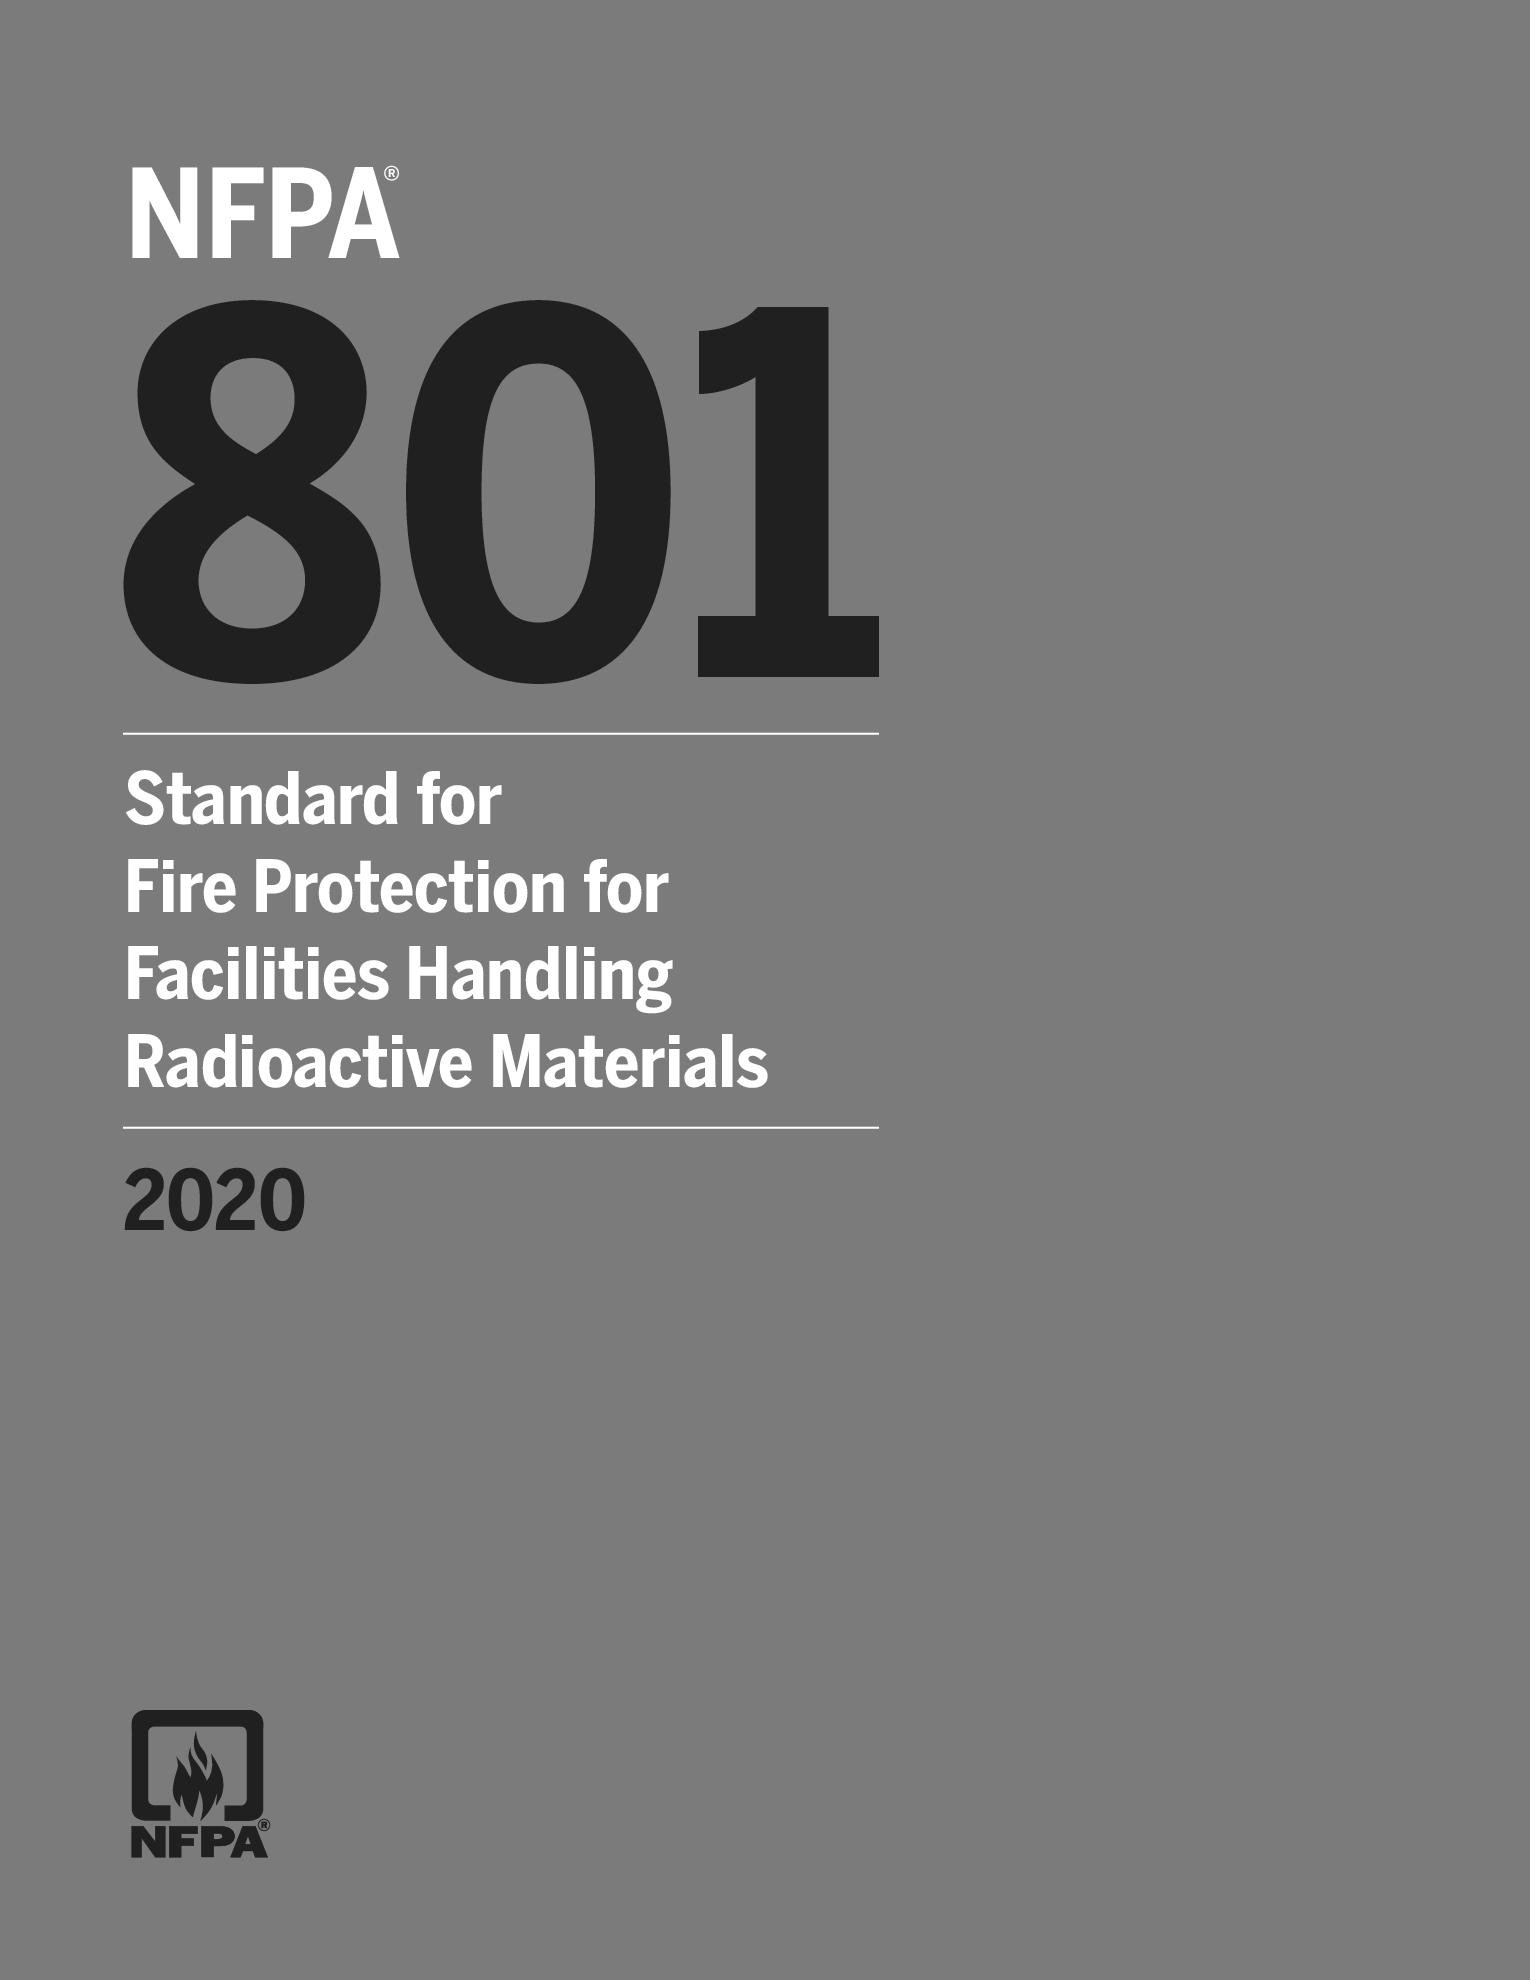 《Standard for Fire Protection for Facilities Handling Radioactive Materials》（NFPA801-2020）【美国消防协会标准】【完整PDF版下载】